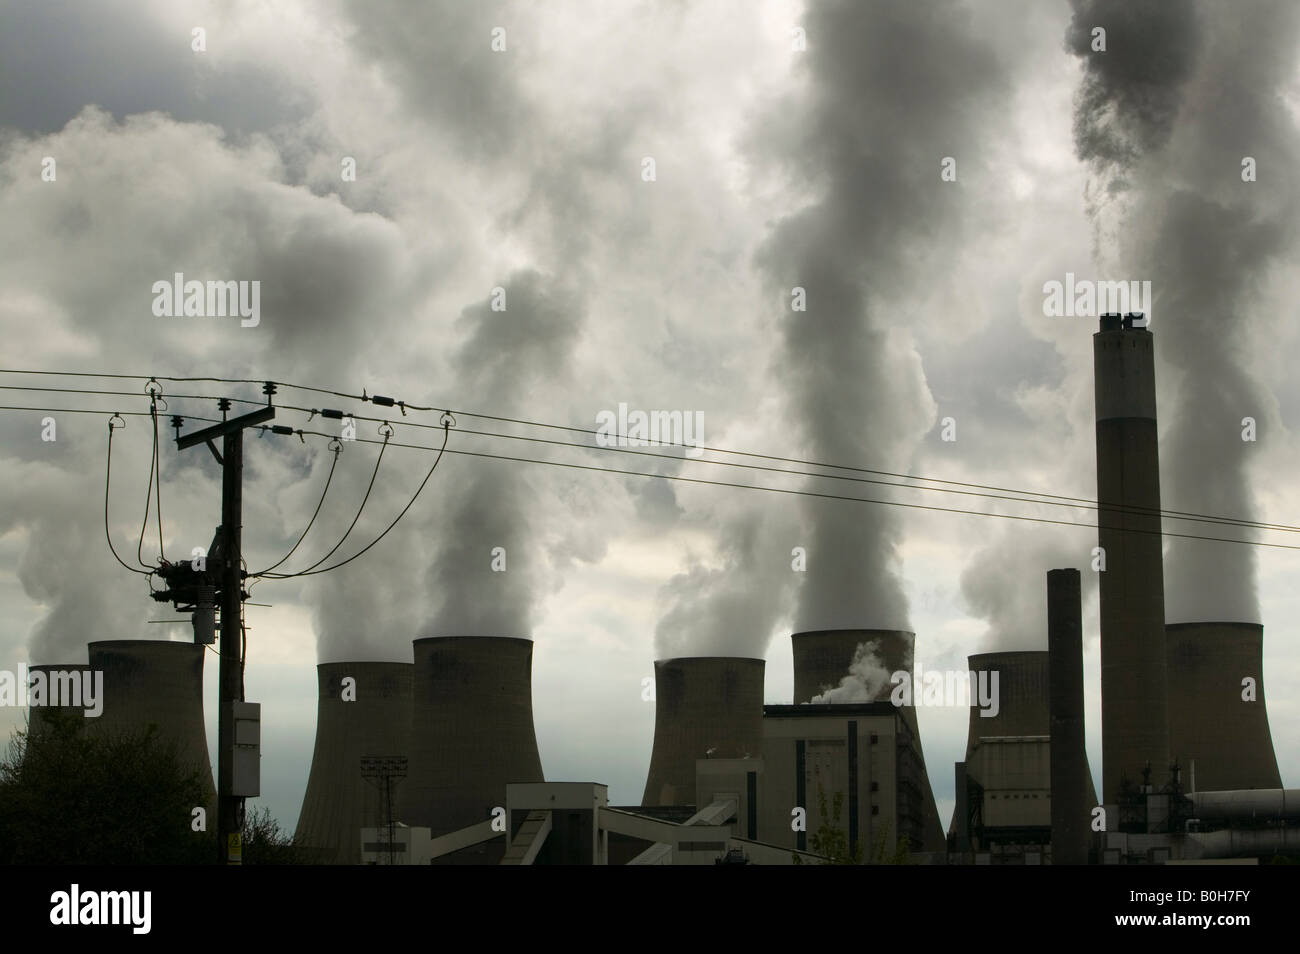 Ratcliffe on soar a coal fired power station in the UK Stock Photo